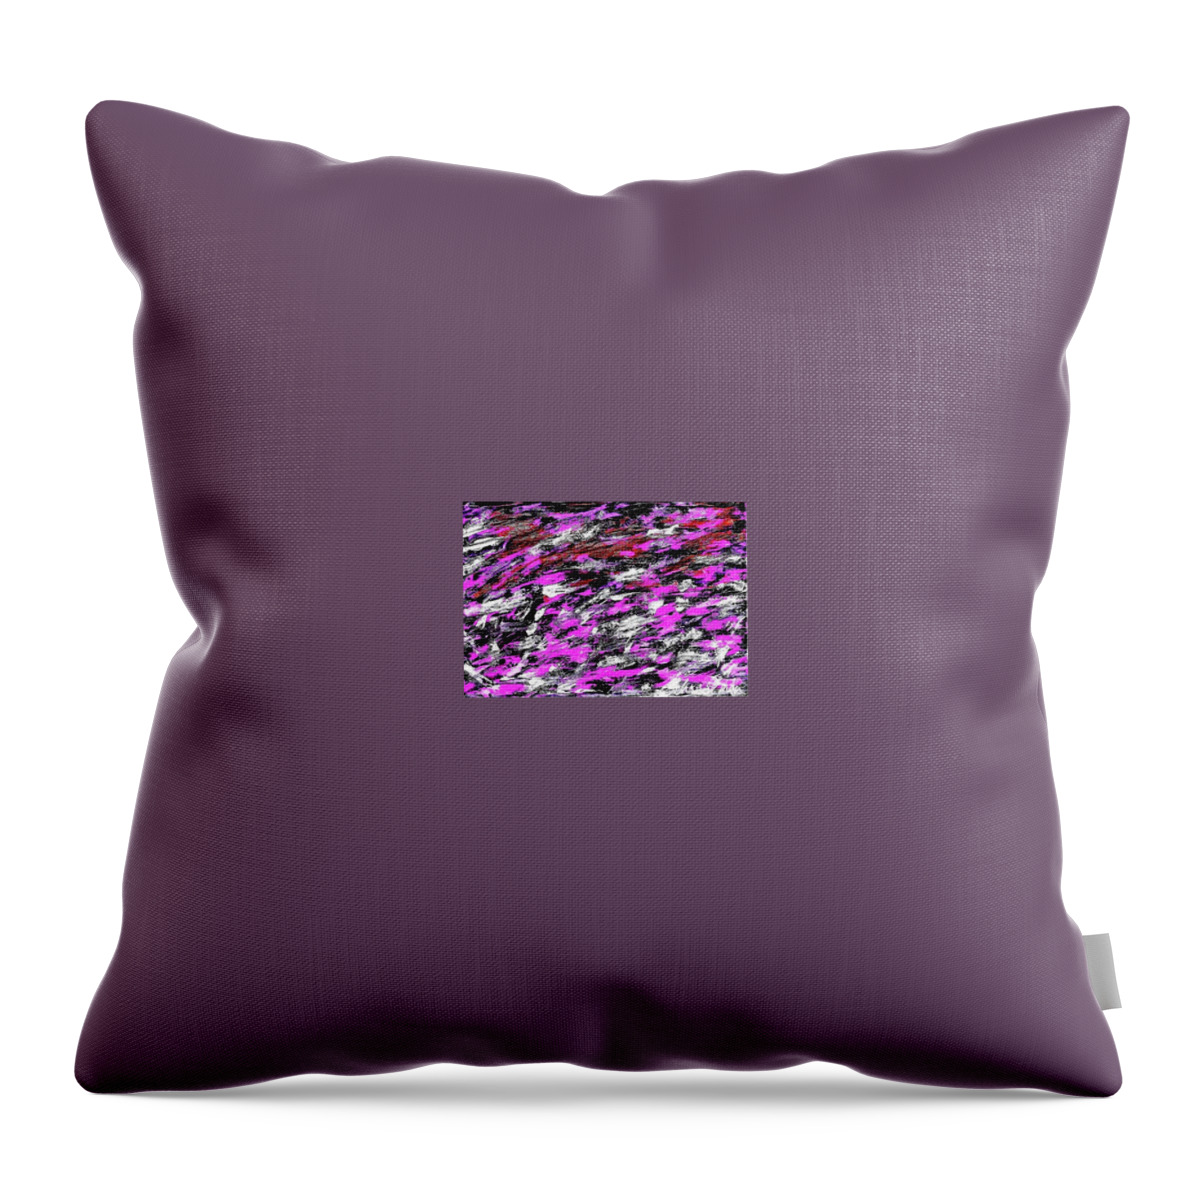 Original Painting Throw Pillow featuring the painting Abstraction With Movement by Susan Schanerman